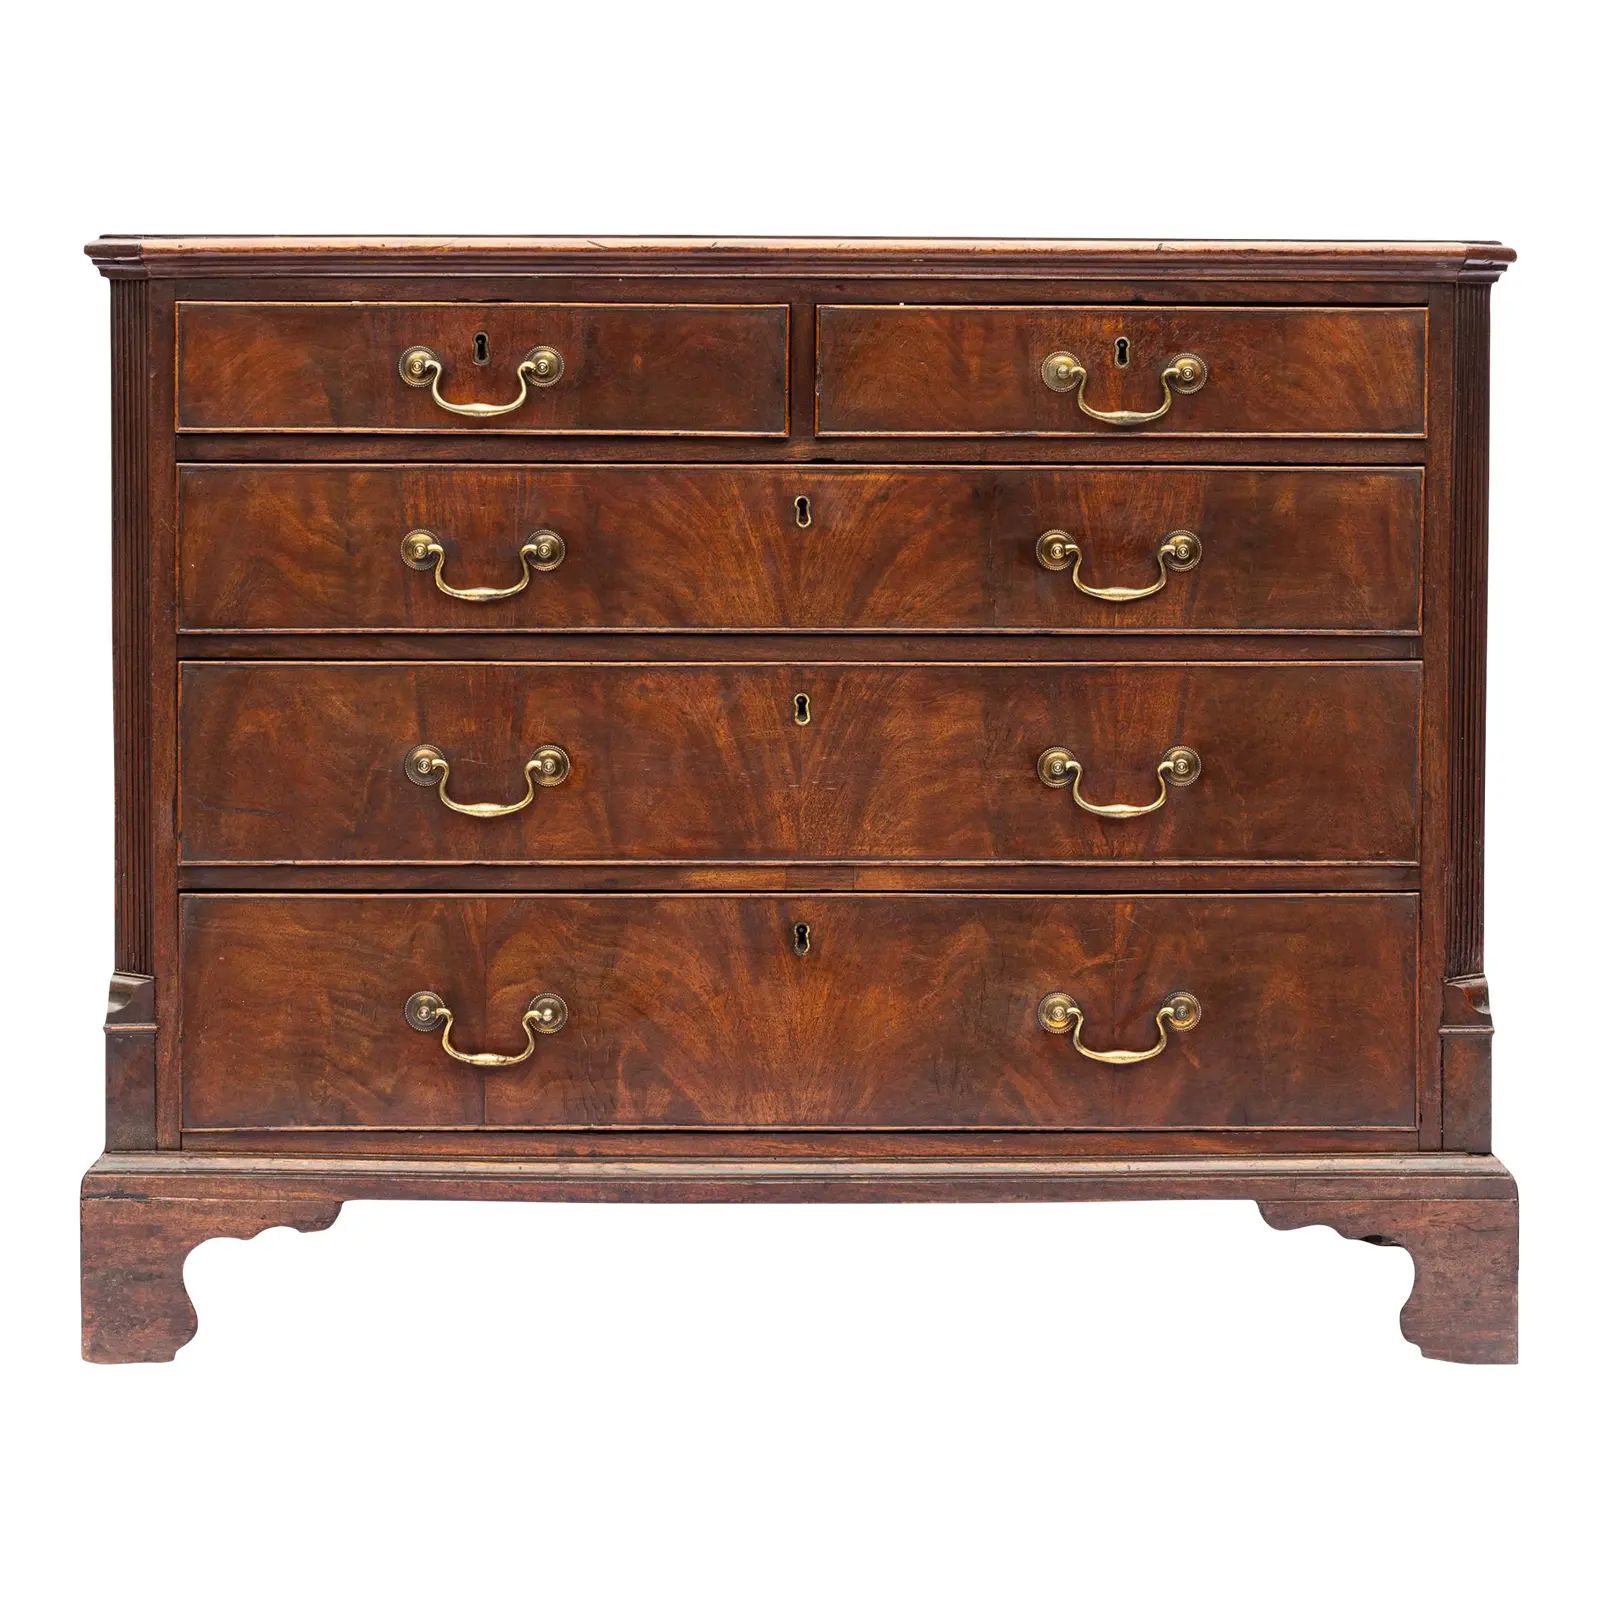 George Iii Mahogany Chest With Banded Top, Canted Corners, and Reeded Posts, C. 1810. | Chairish